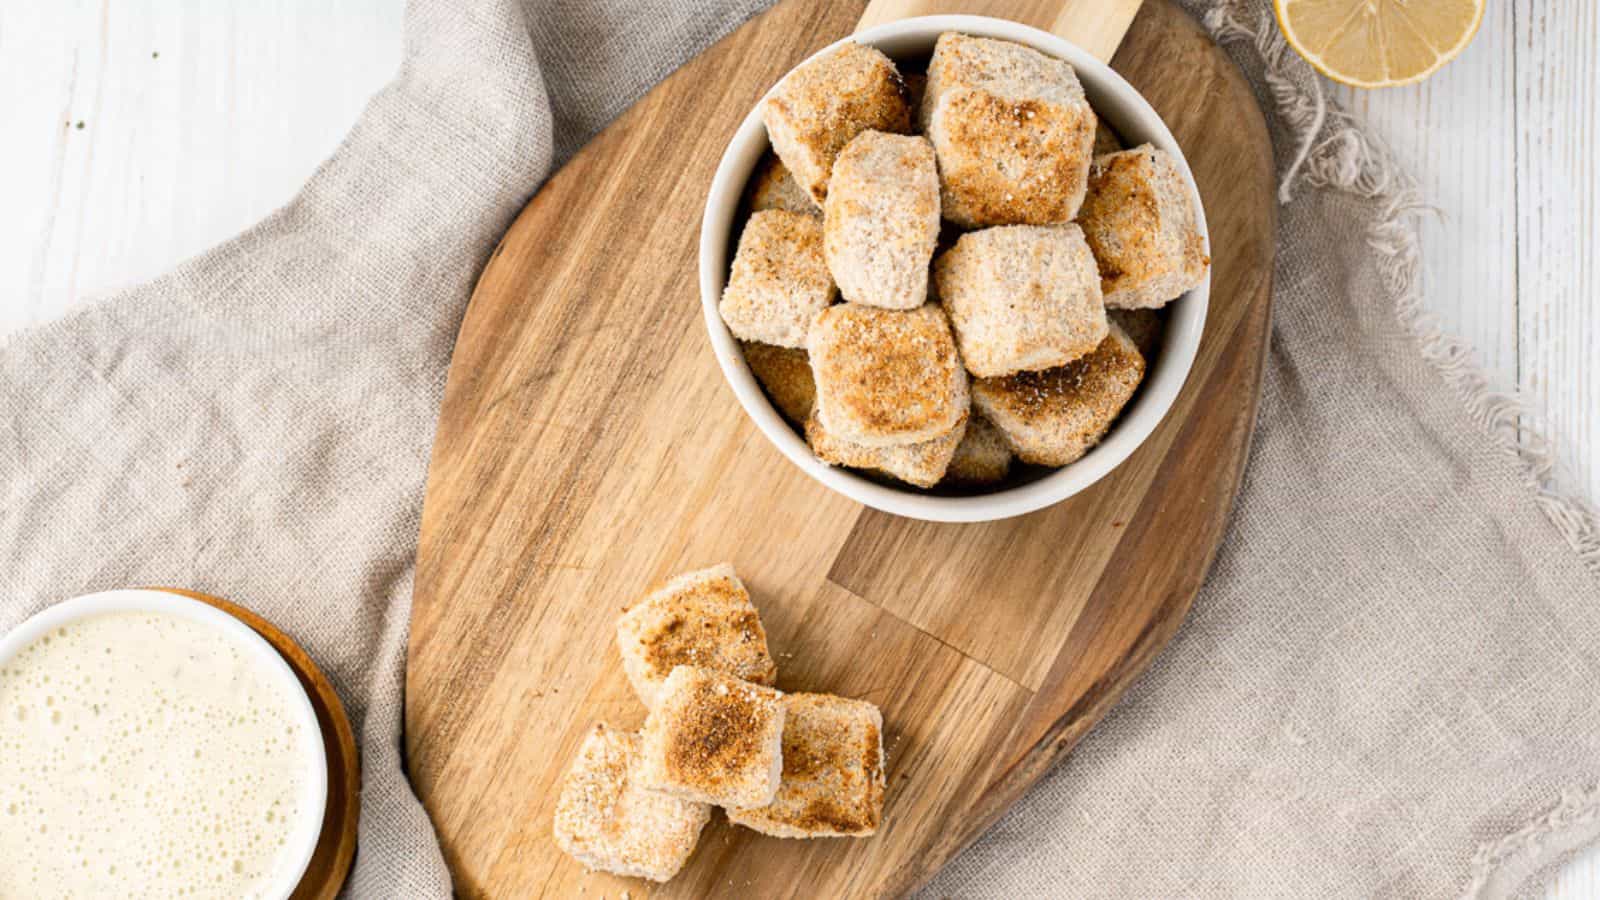 <p>Change up your game day menu with these crispy, flavorful air fryer tofu bites. They’re a healthier option, perfect for dipping, and won’t weigh you down as you cheer on your team. Whether you’re a tofu enthusiast or just looking for something different, these bites are a must-try.<br><strong>Get the Recipe: </strong><a href="https://twocityvegans.com/air-fryer-tofu-nuggets-vegan-ranch-sauce/?utm_source=msn&utm_medium=page&utm_campaign=msn" rel="noopener">Air Fryer Tofu Bites</a></p>